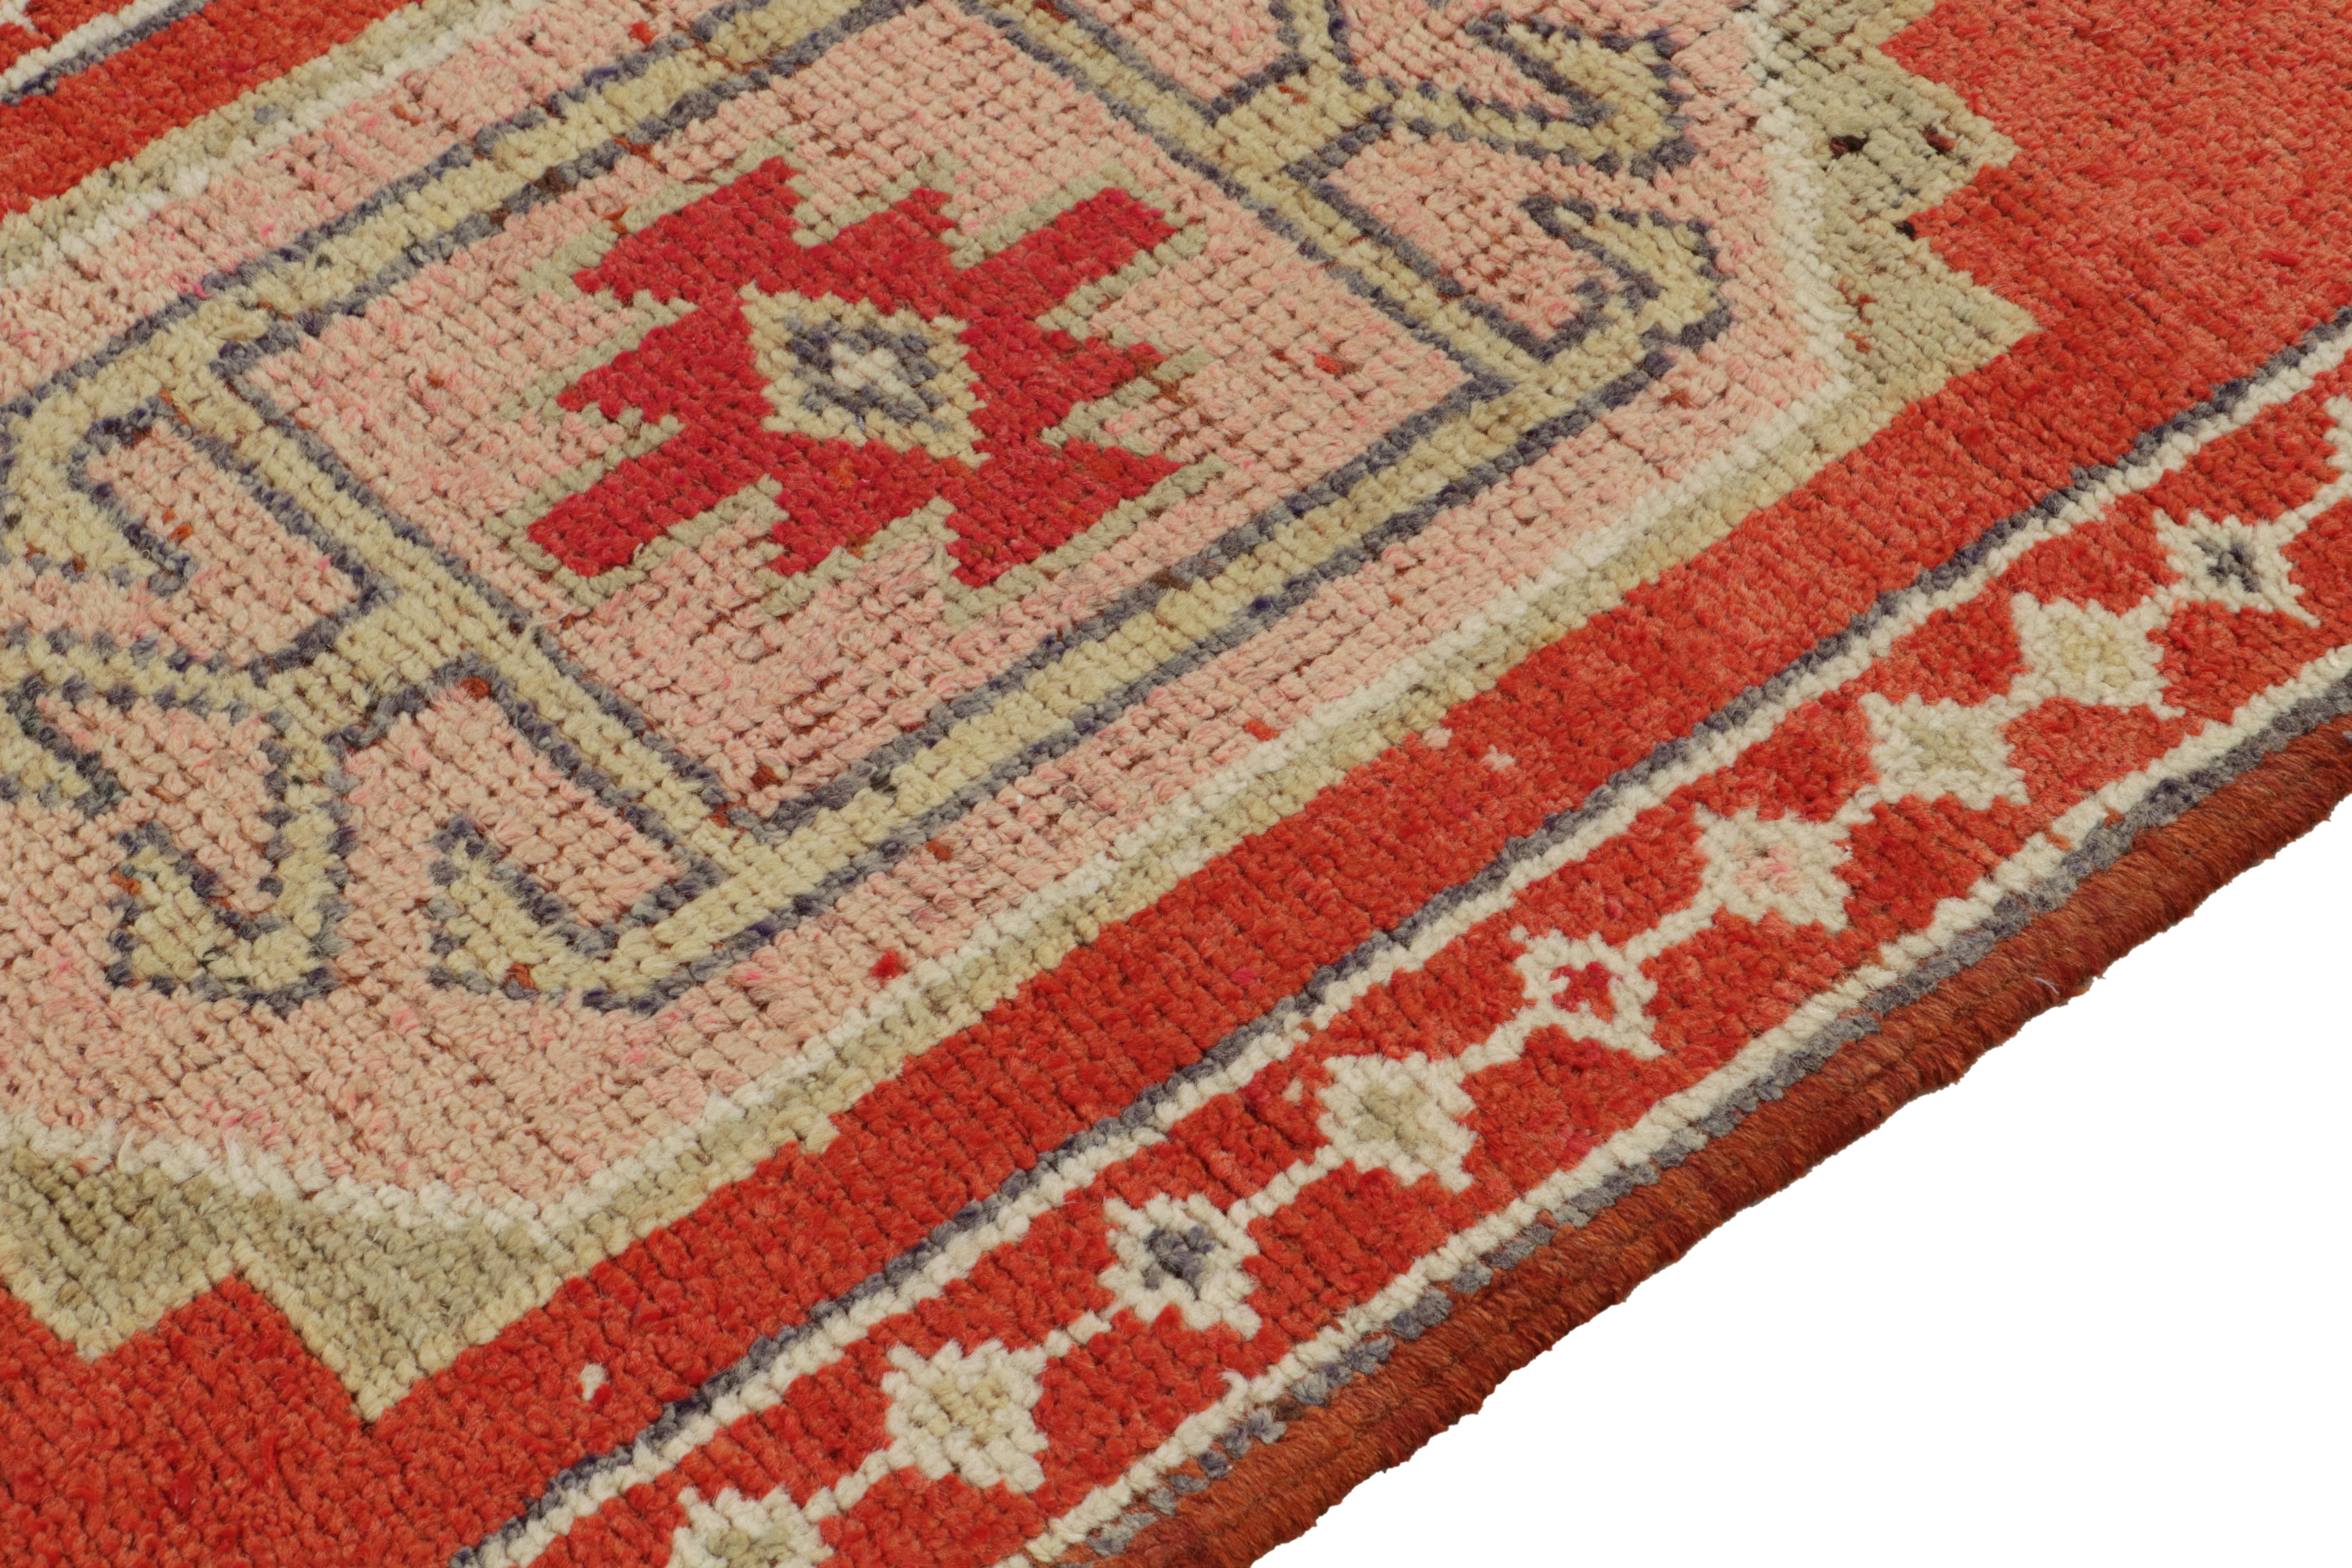 1950s Vintage Tribal Runner in Red, Beige and Medallion Patterns by Rug & Kilim In Good Condition For Sale In Long Island City, NY